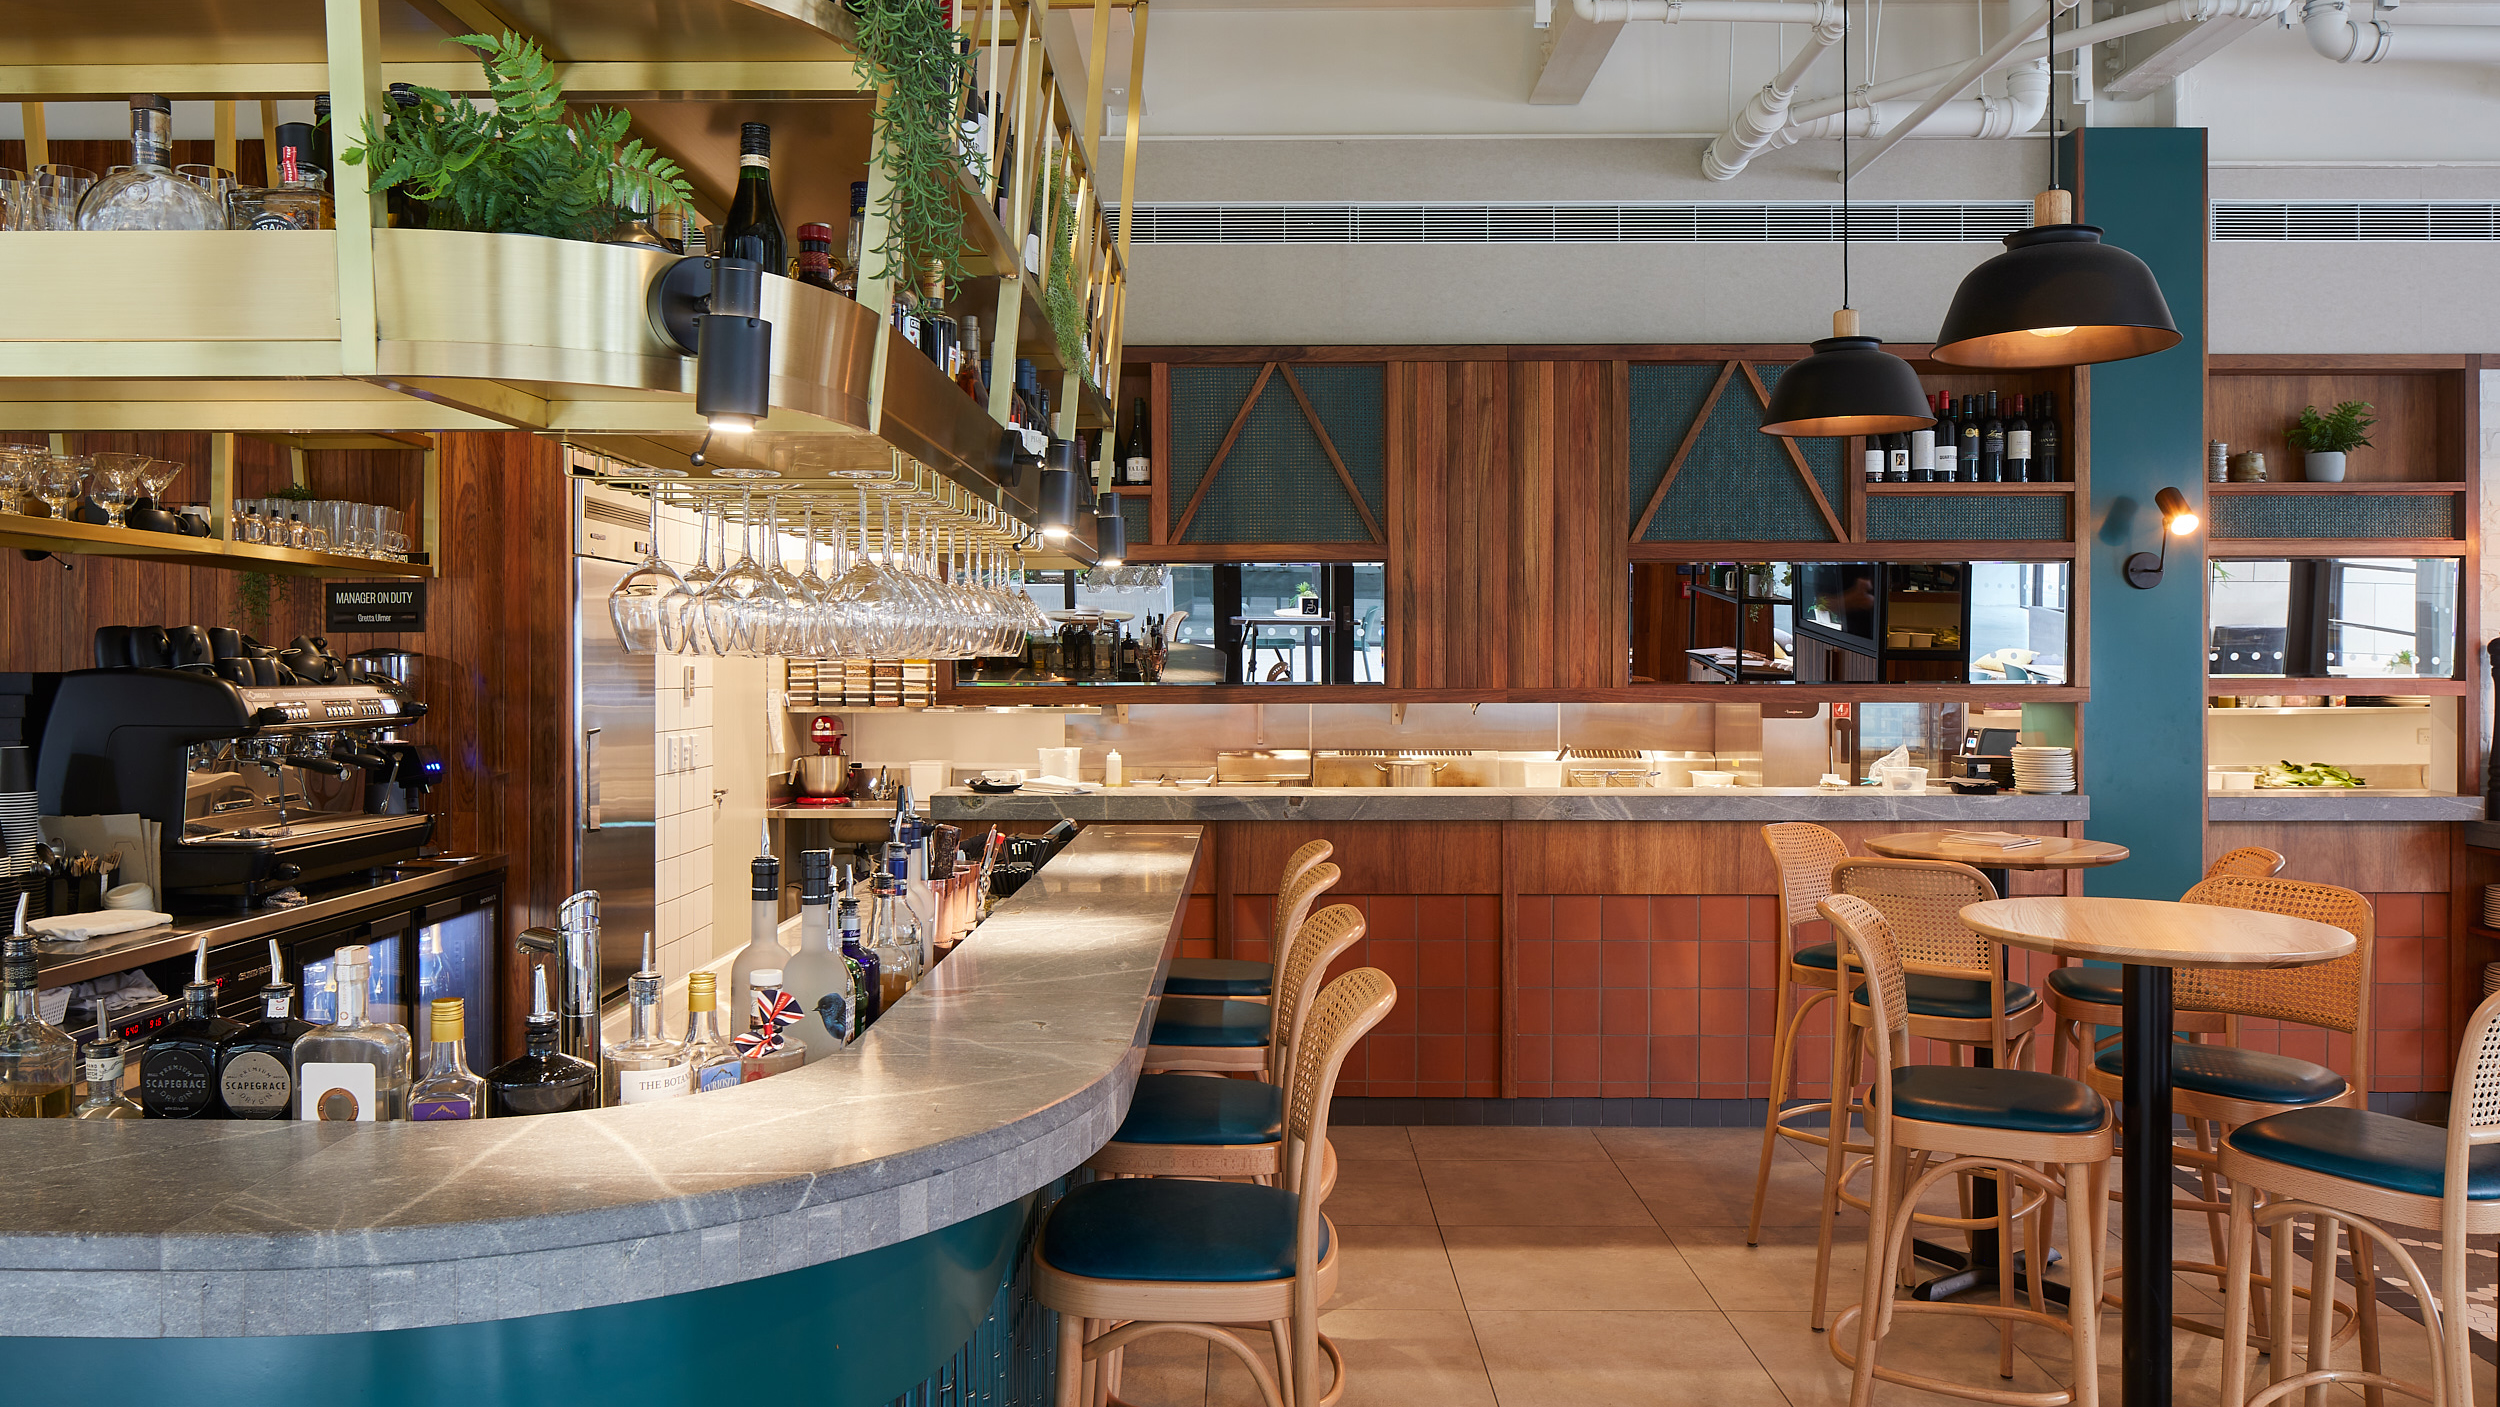 Local Dunedin company completes restaurant fitout for Christchurch Hotel